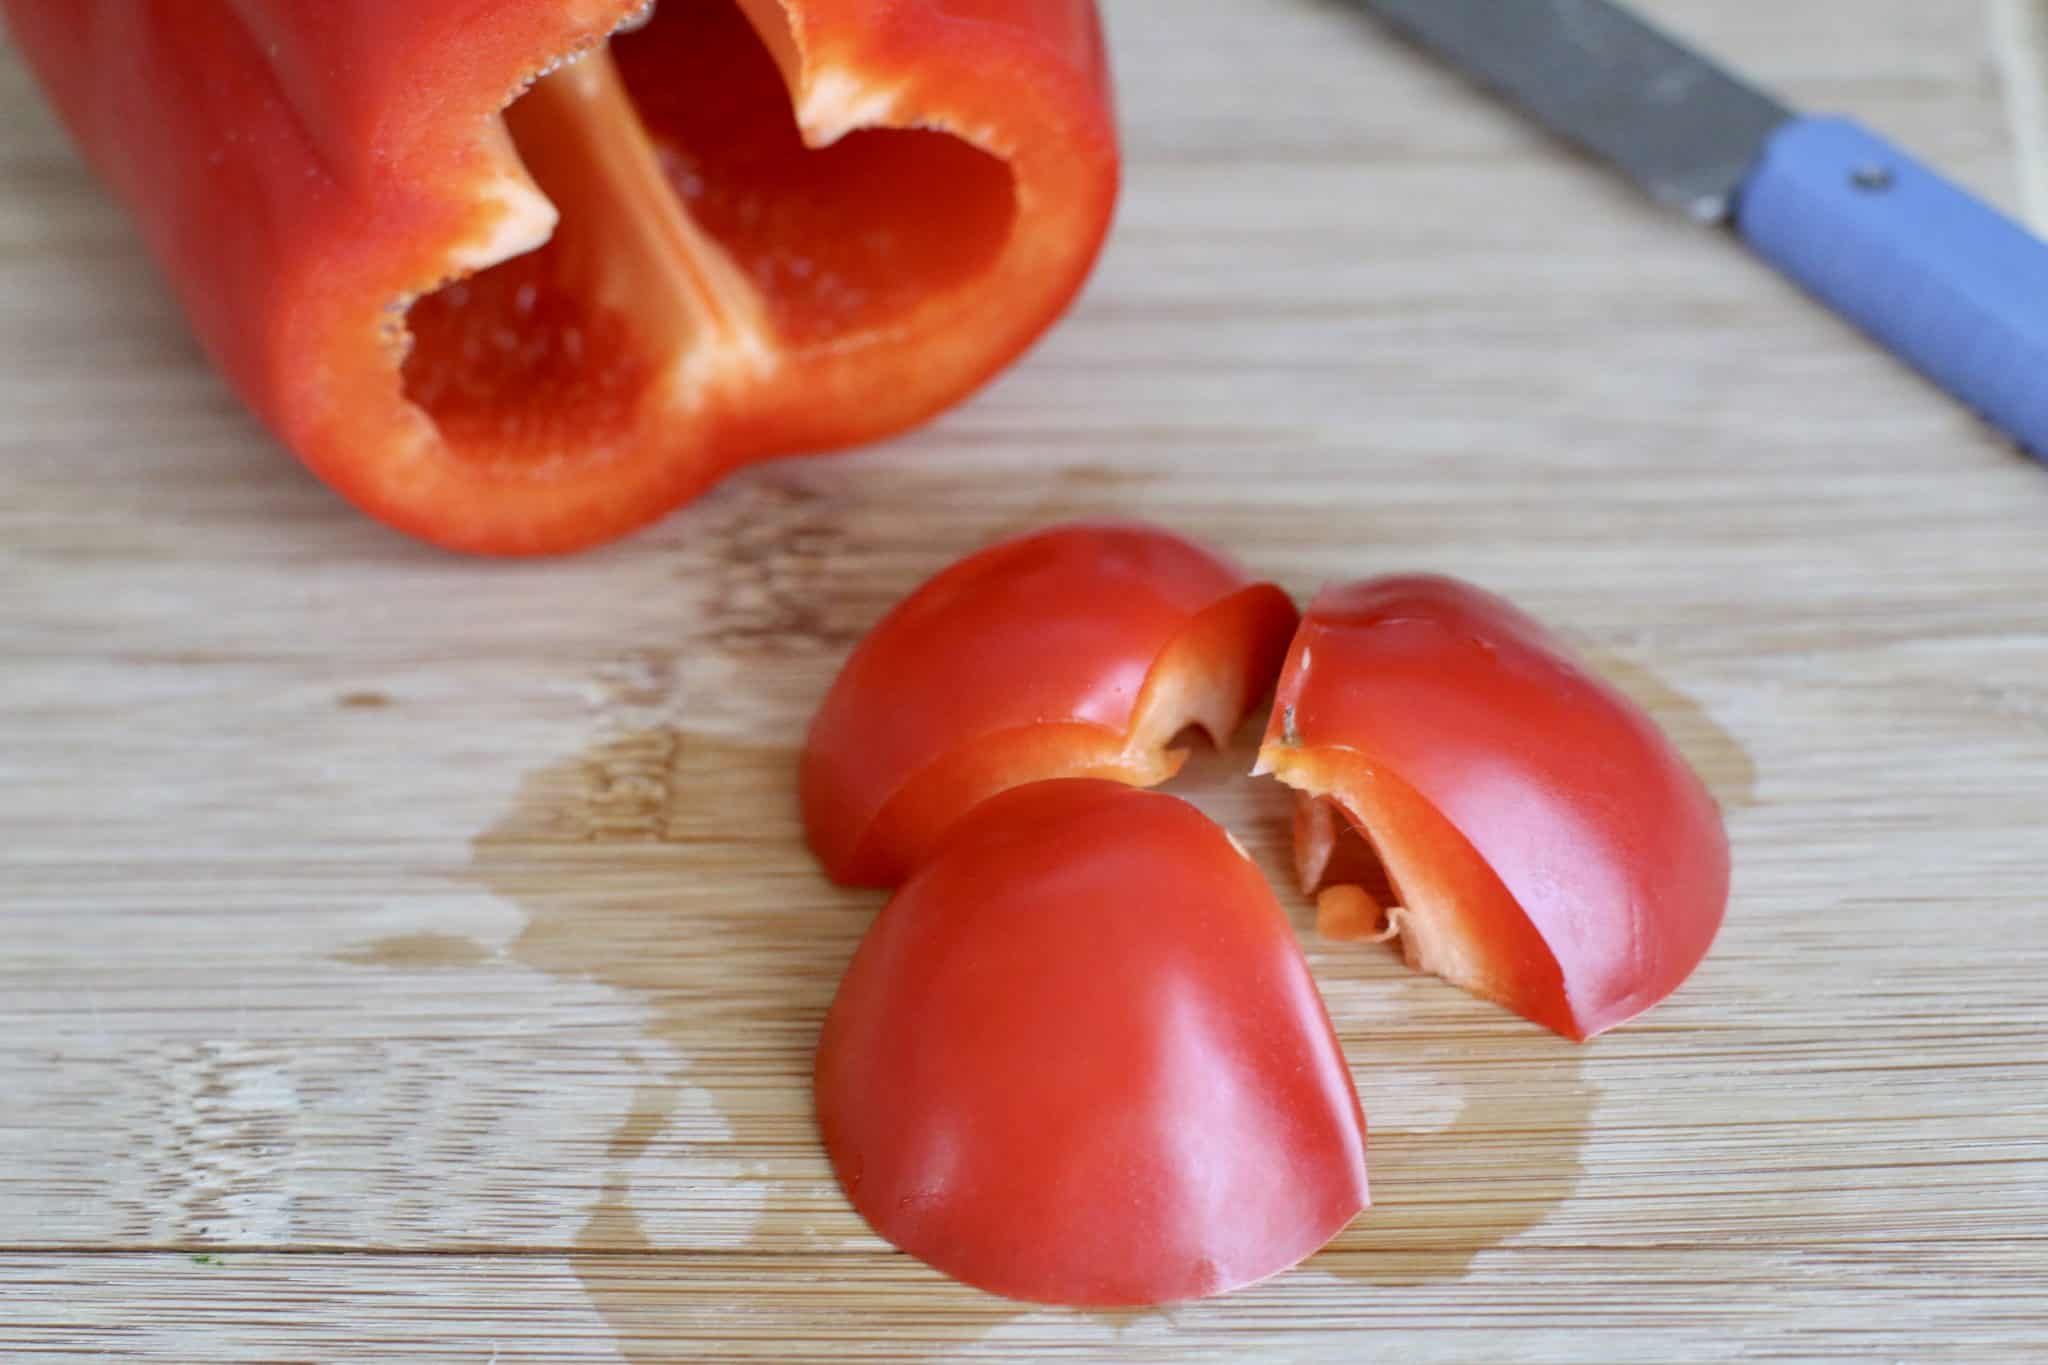 the end of a red pepper sliced into three parts.